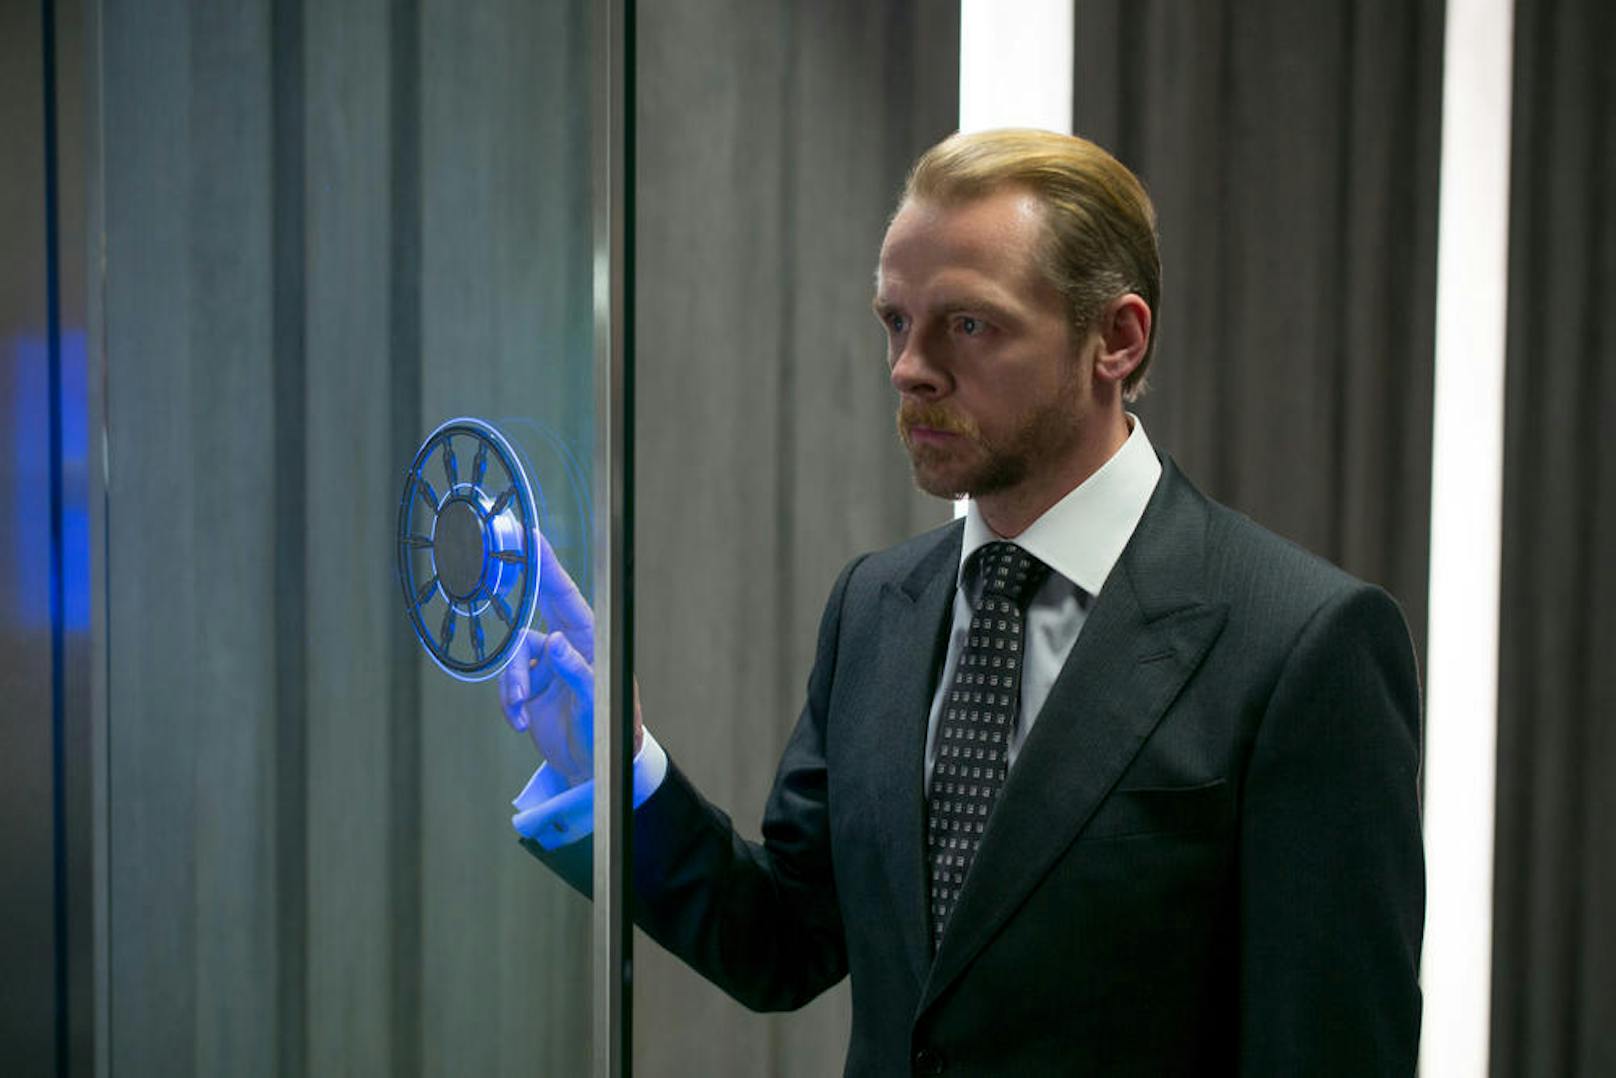 Simon Pegg in "Mission: Impossible - Rogue Nation"